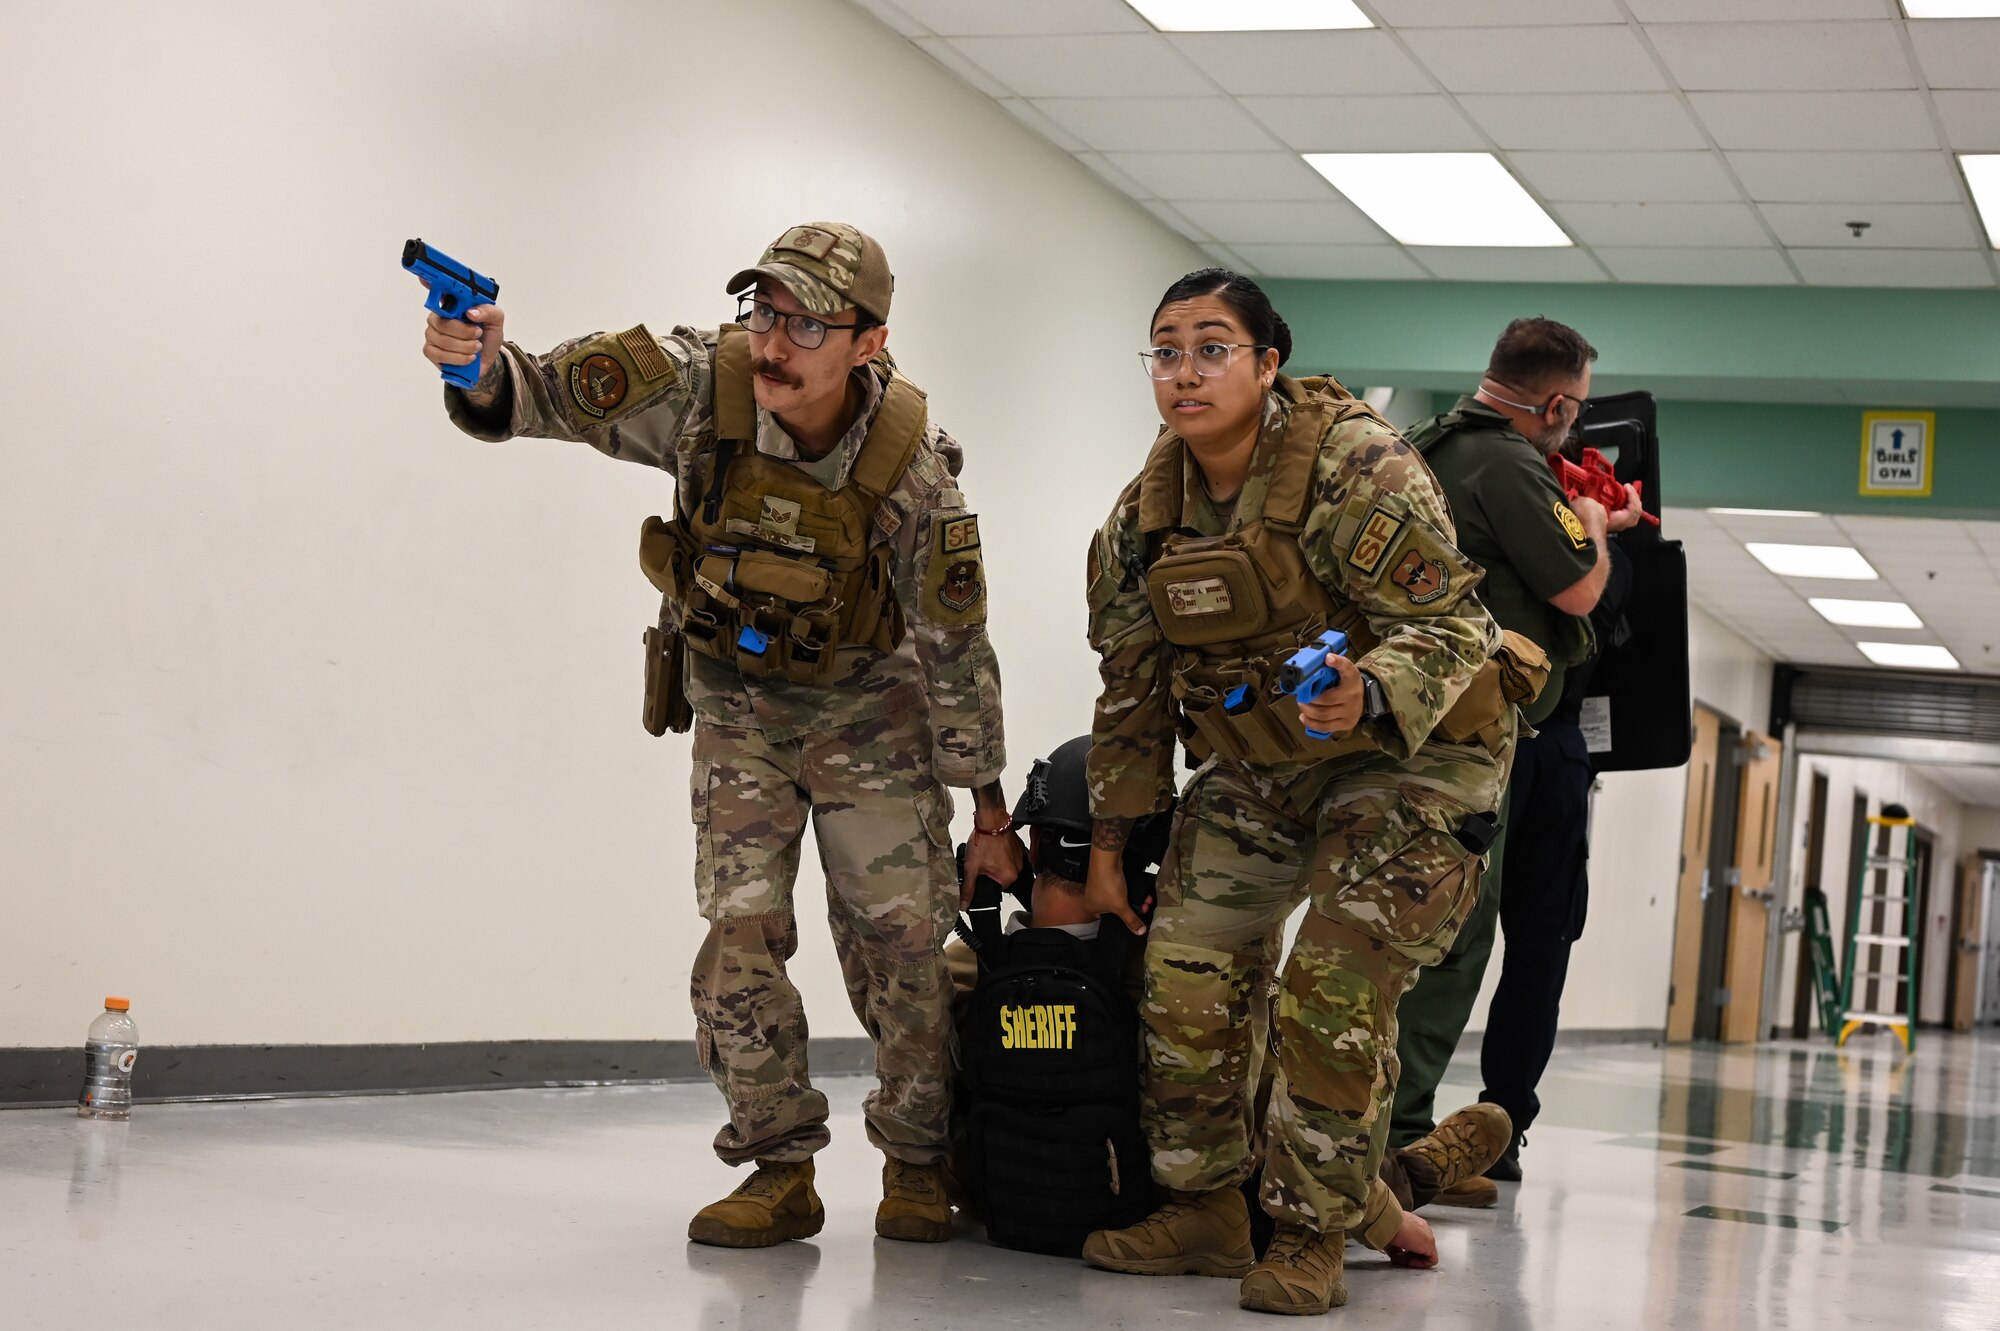 U.S. Air Force Staff Sgt. Anthony Zayas (left), 47th Security Forces Squadron flight sergeant, and Staff Sgt. Siree Mooney (right), 47th SFS flight sergeant, drag a simulated victim during a training exercise created by the Val Verde Sheriff's Office at San Felipe Memorial Middle School, Texas, July 12, 2023.